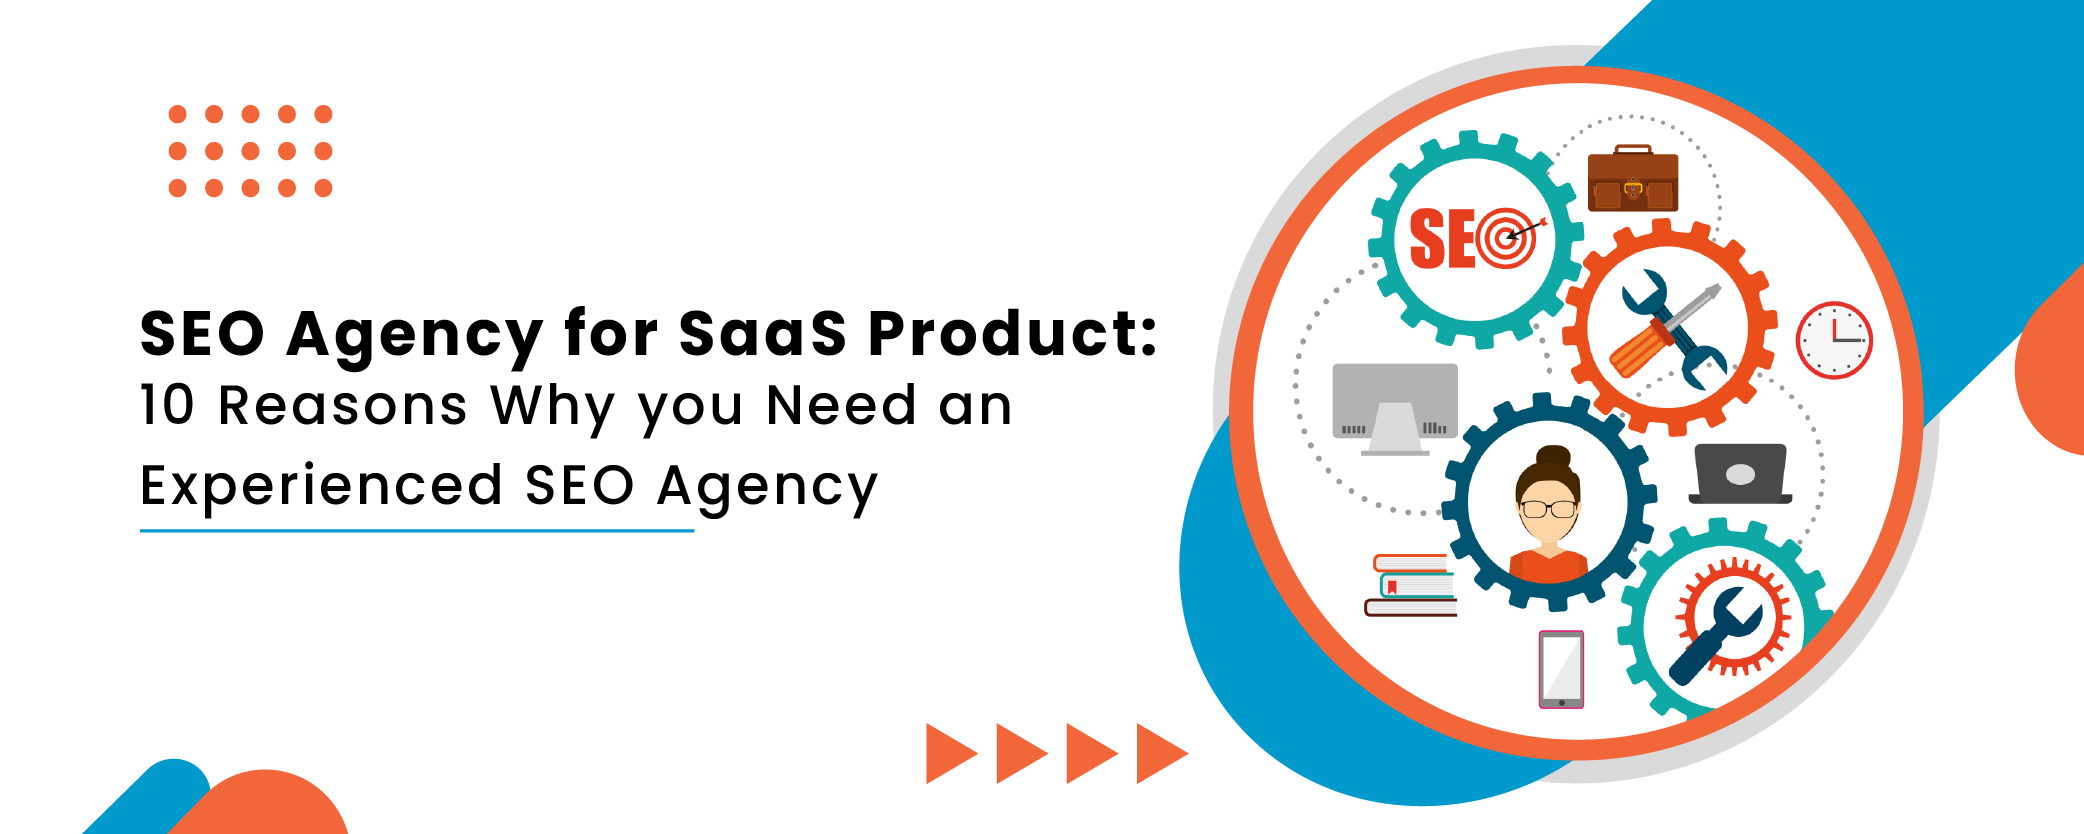 10 SEO Agency for SaaS Product 10 Reasons Why you Need an Experienced SEO Agency-01